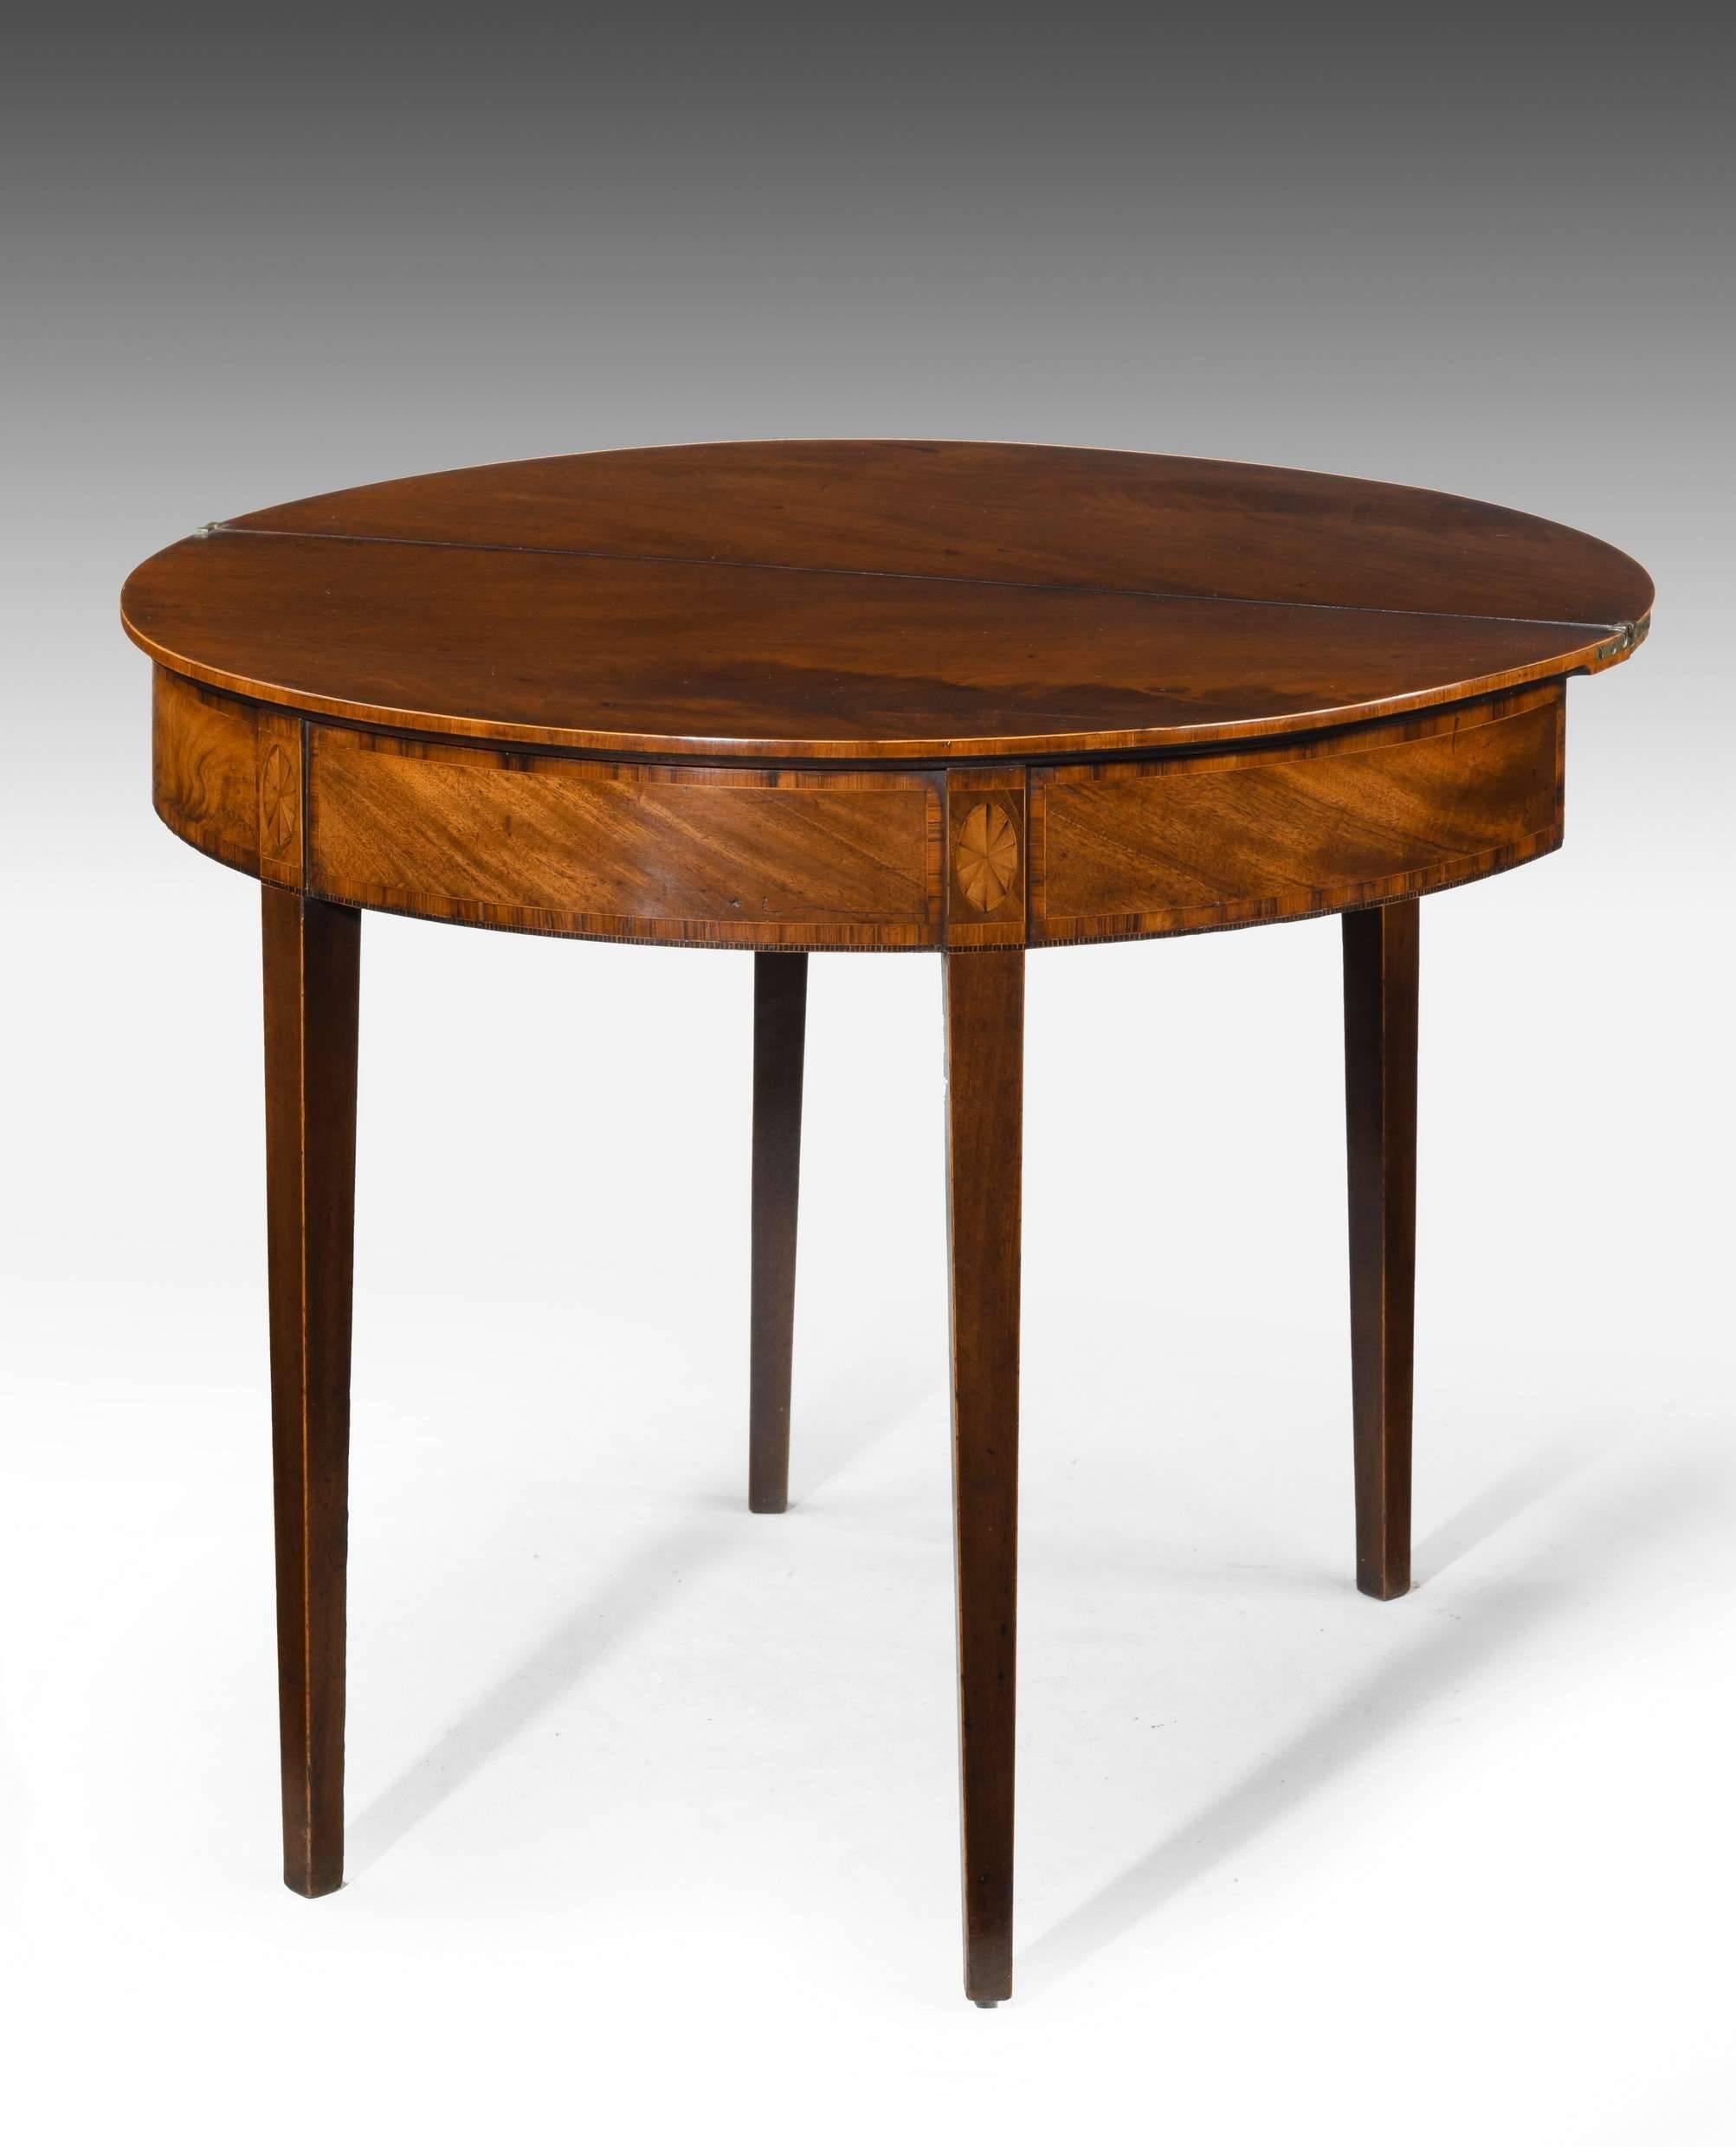 A good Sheraton period mahogany demilune tea table. The tapering supports with boxwood edging. The top sections with oval inlaid patera. Beautifully figured timbers.

When closed 17.75 inches.